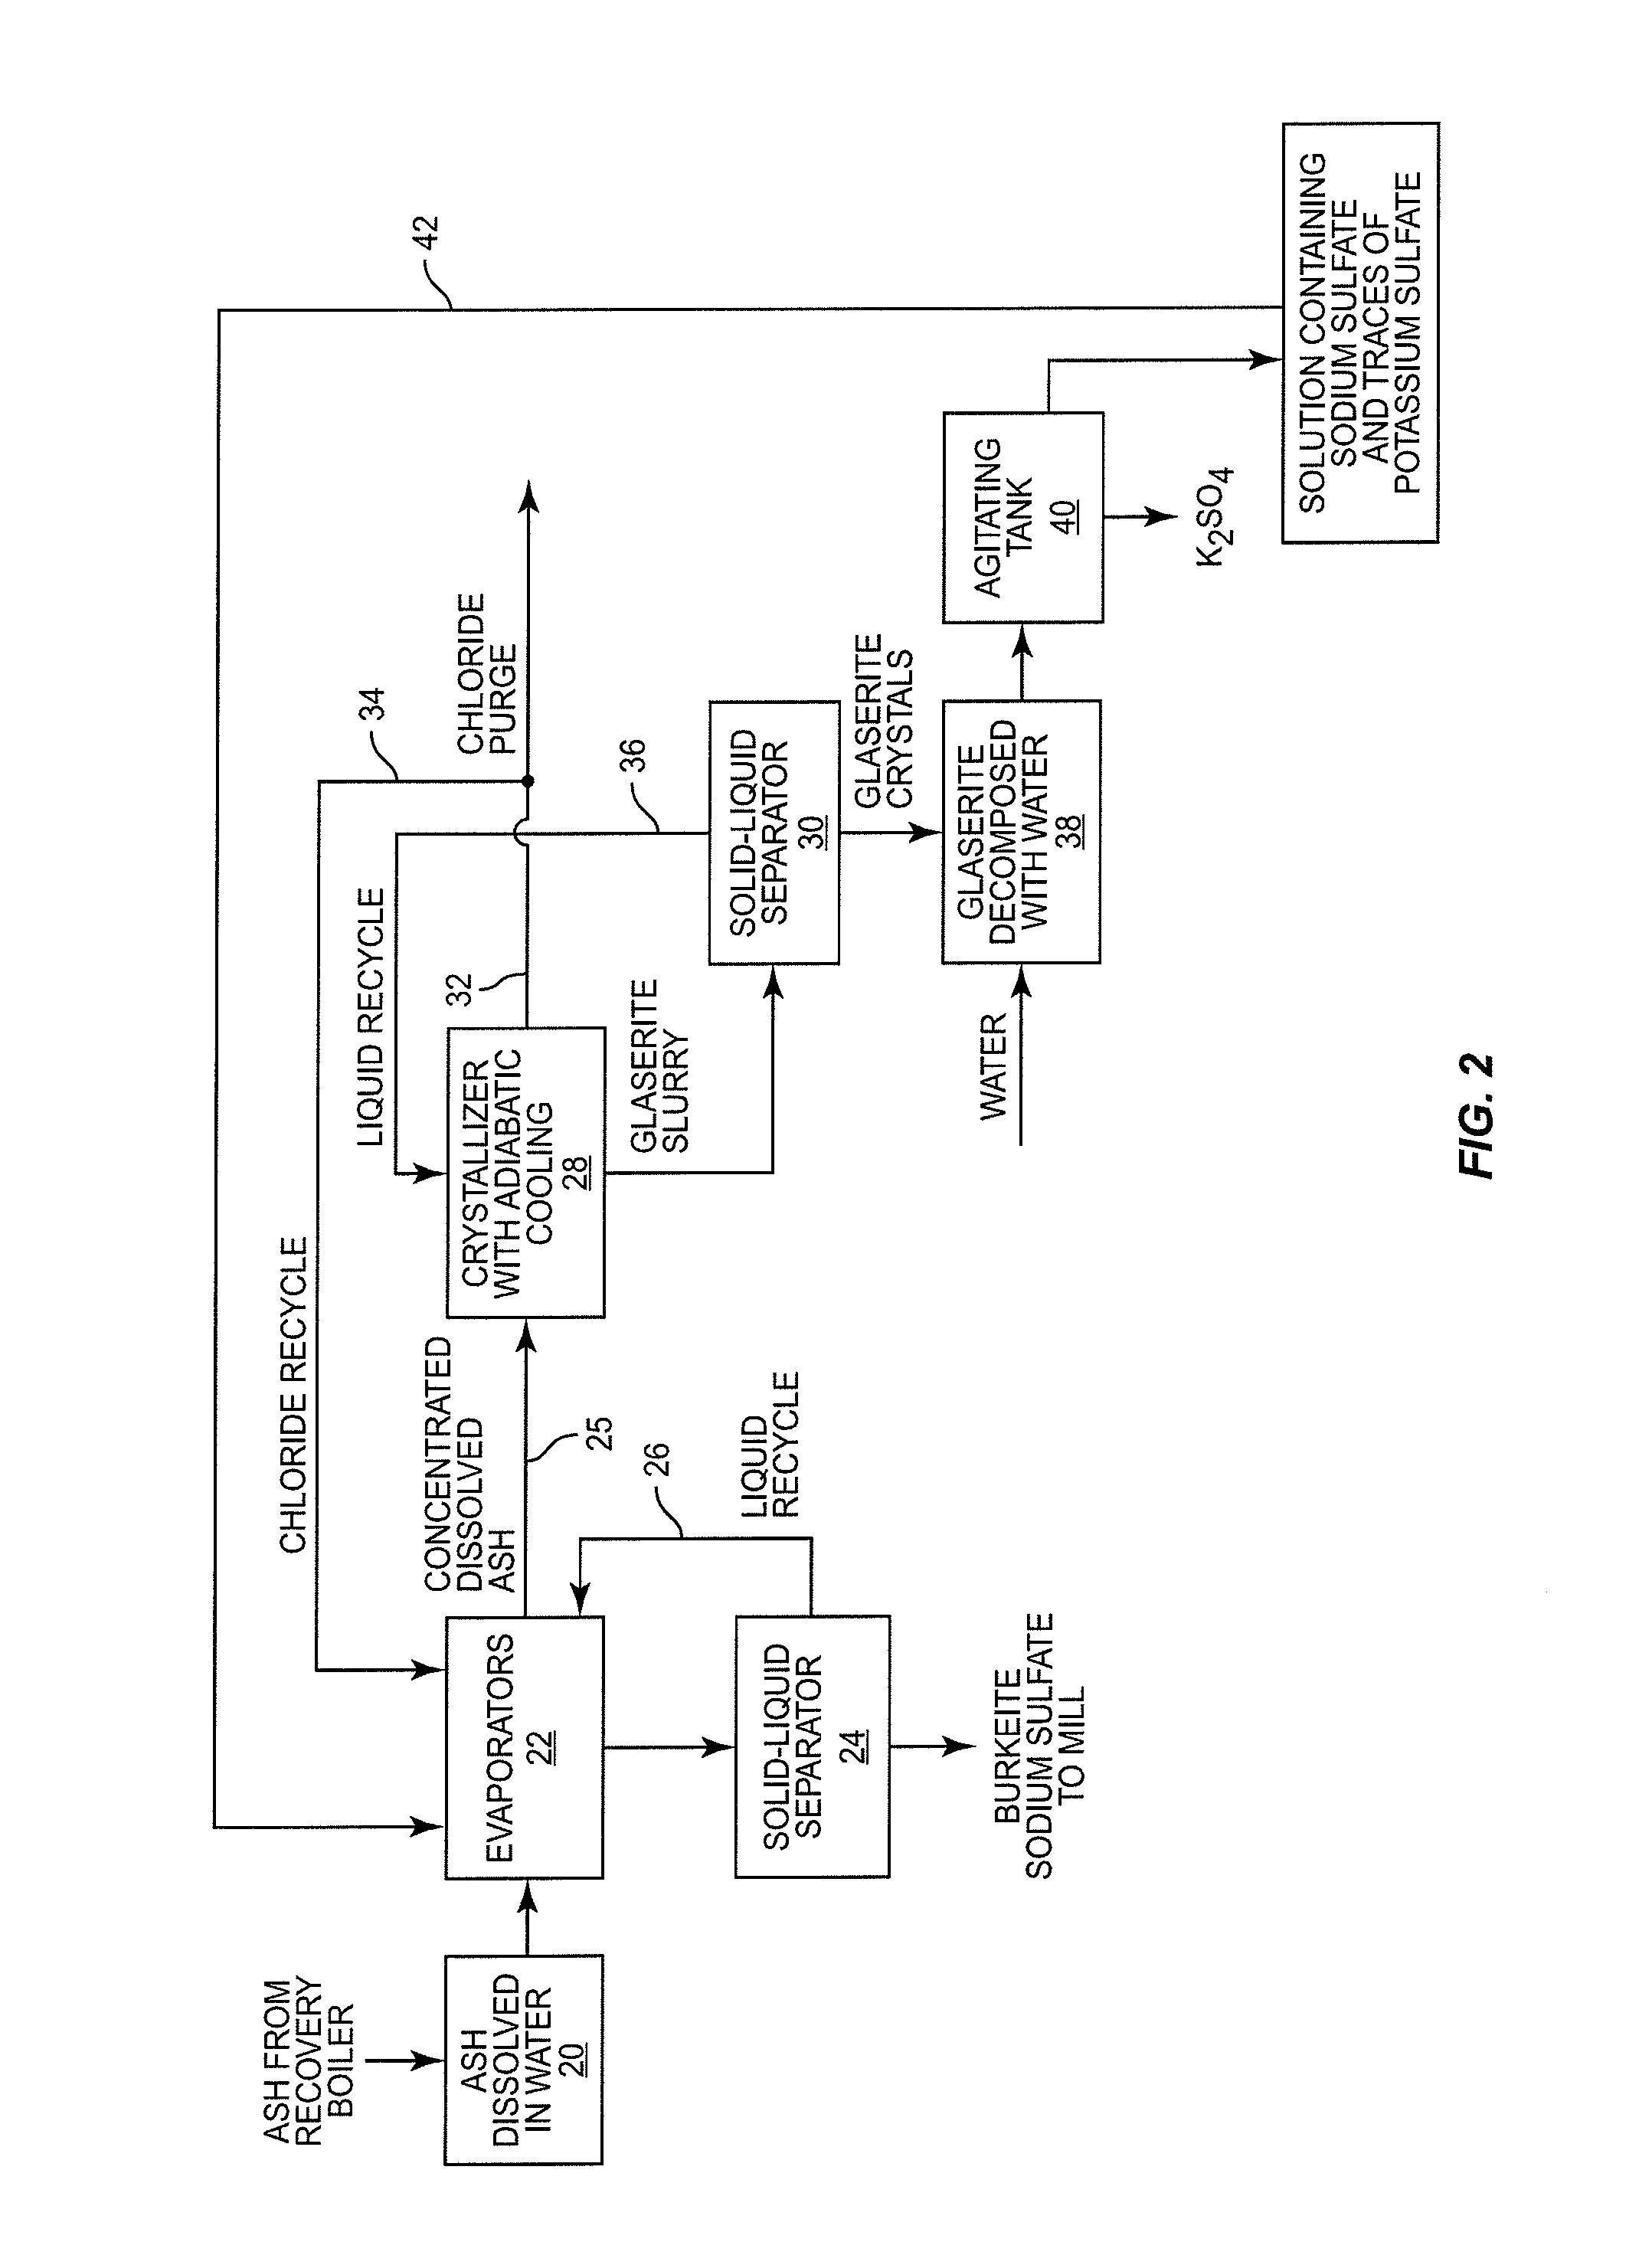 Method for recovering pulping chemicals and reducing the concentration of potassium and chloride therein